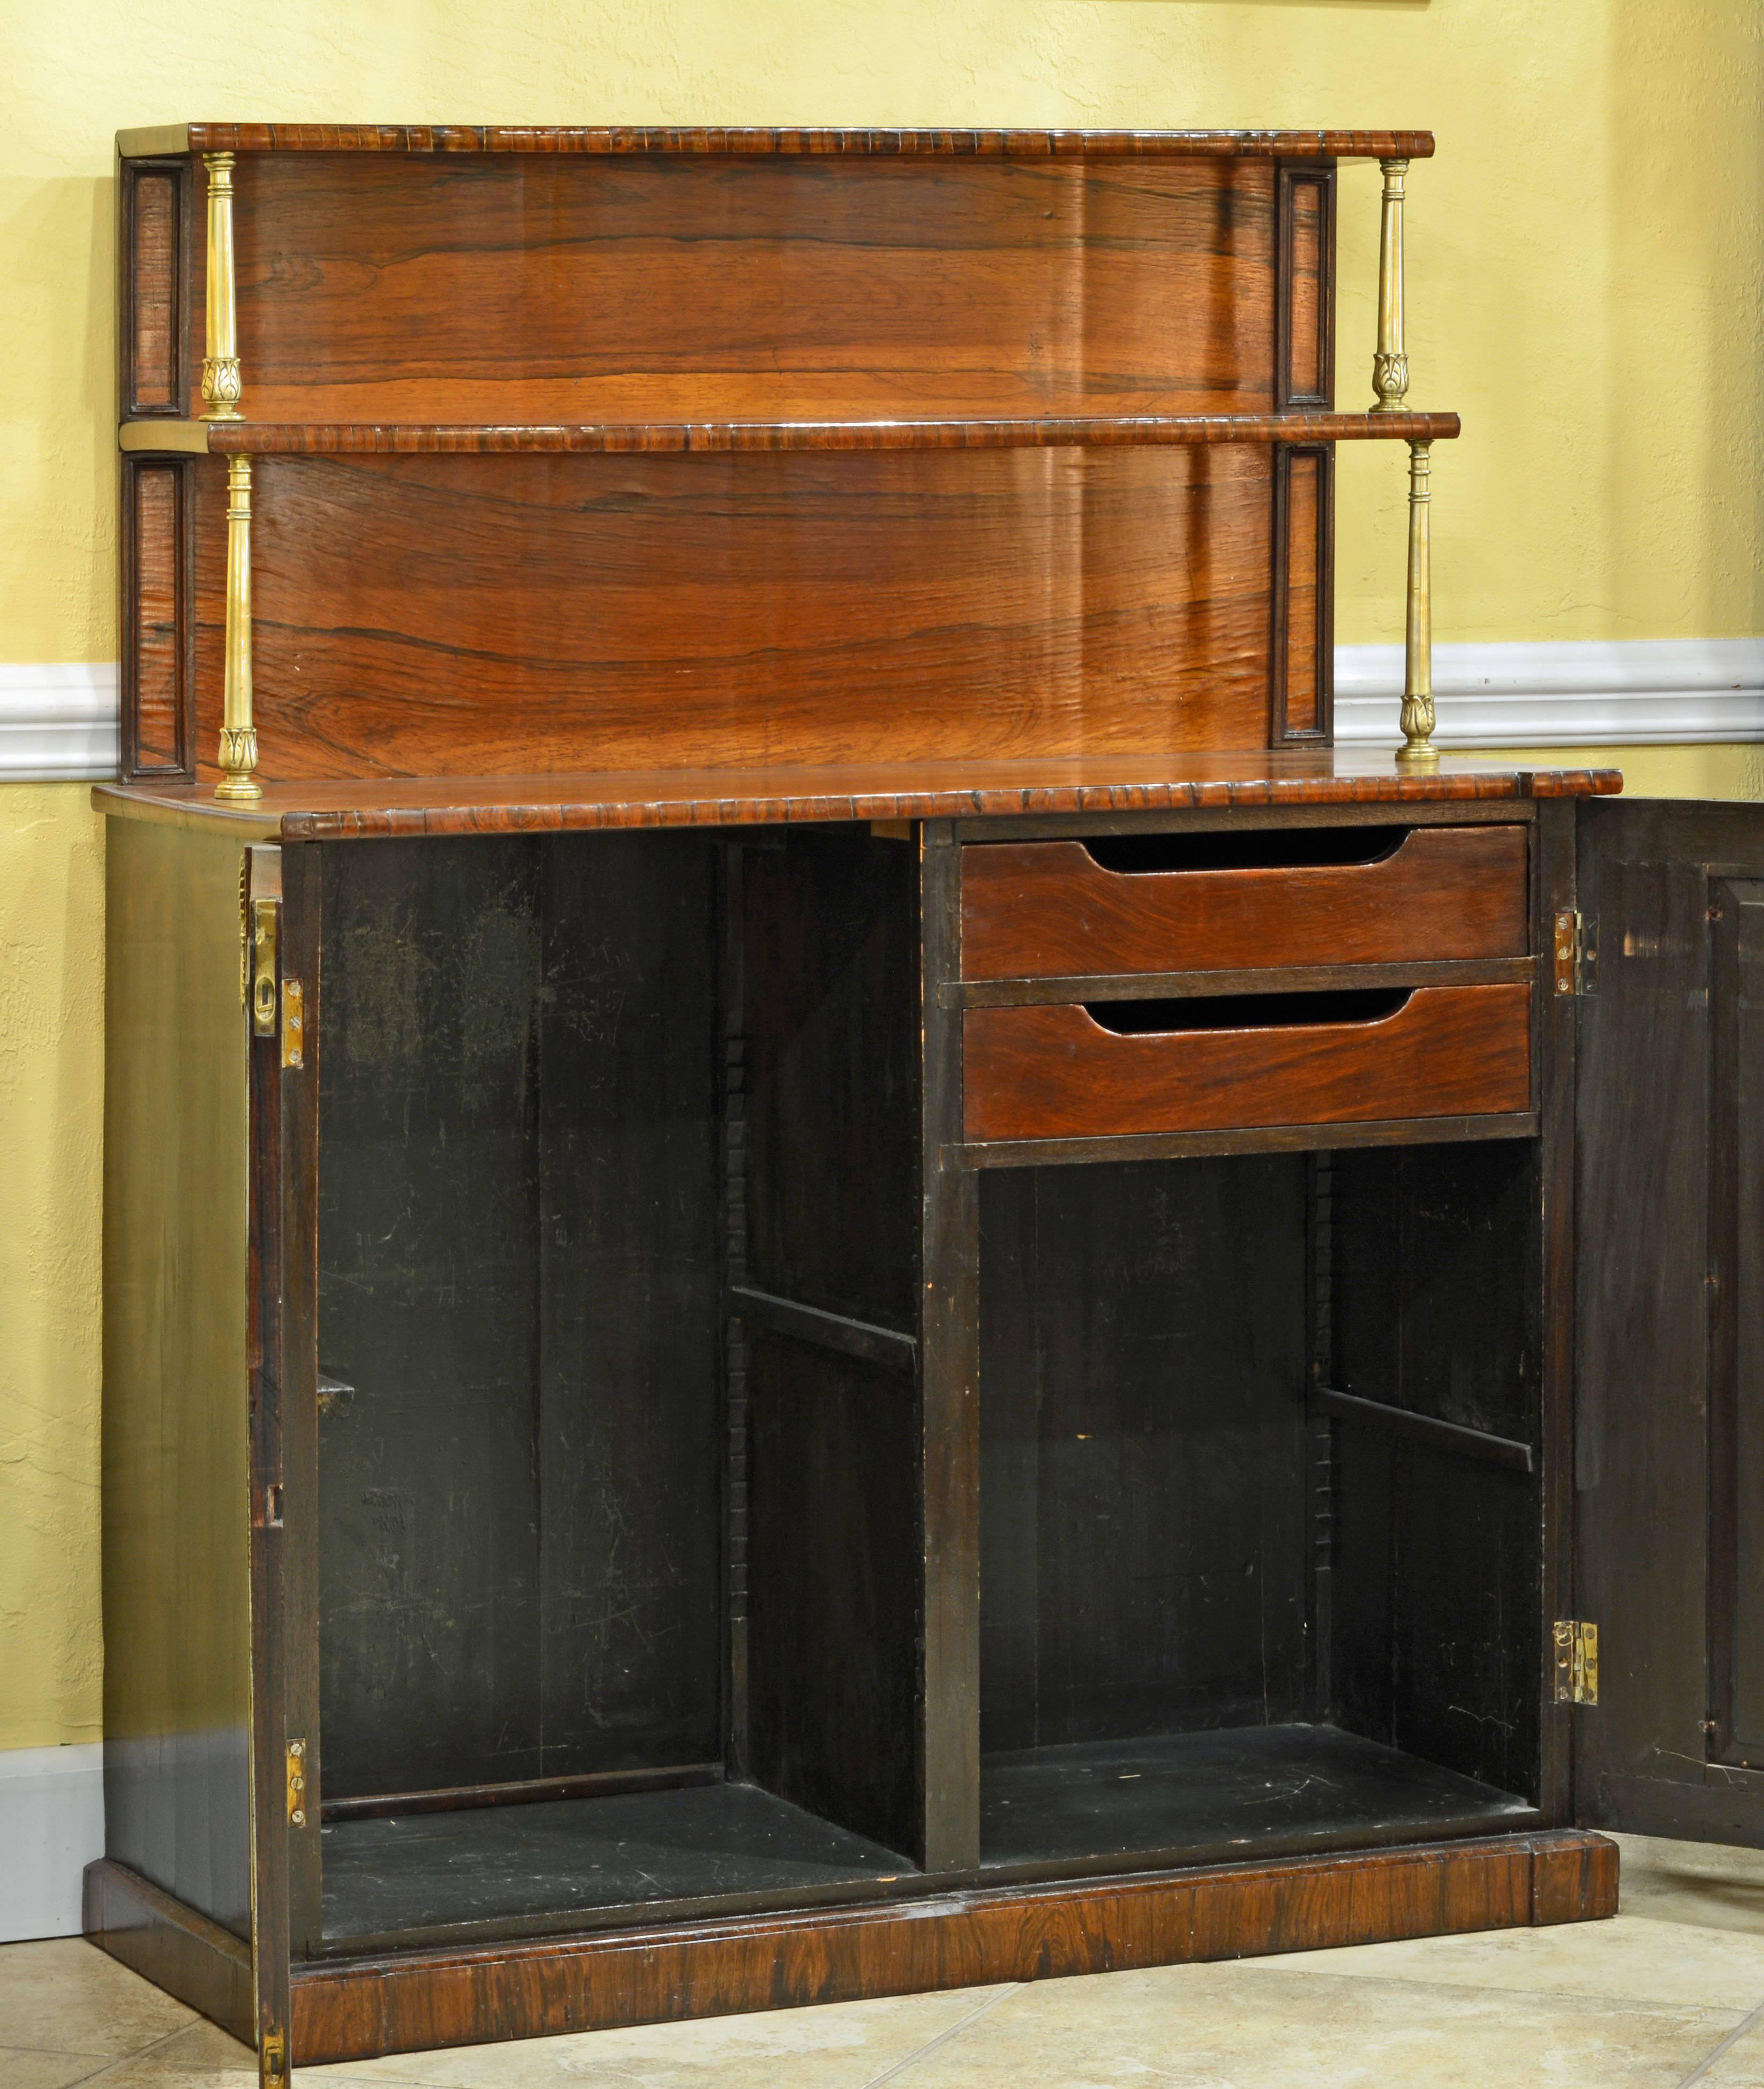 This noble piece of furniture in superb quality rosewood features two raised shelves supported by archantus themed brass columns above the lower section resting on a plinth base and with two paneled and brass trimmed doors flanked by bronze mounts